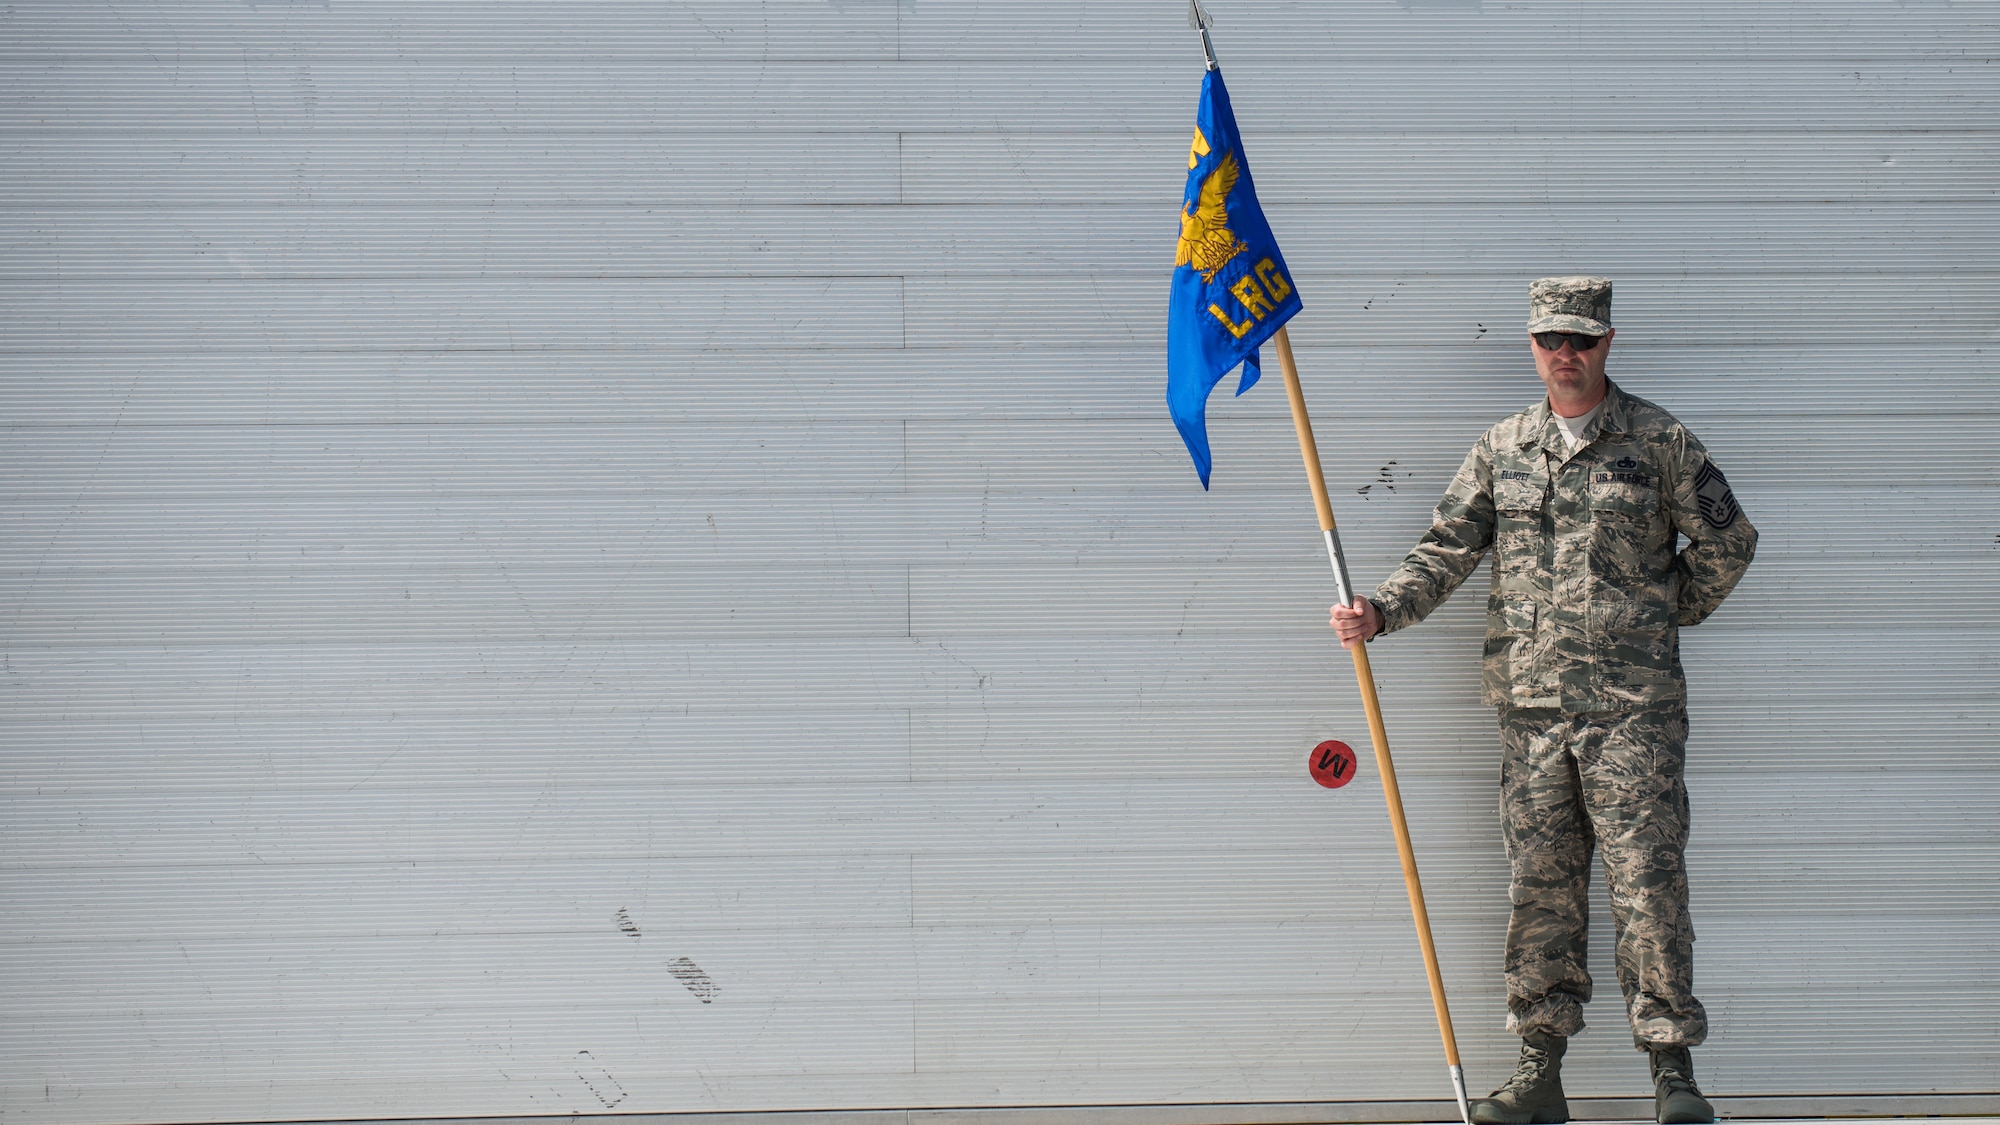 Chief Master Sgt. Paul Elliott, 86th Logistics Readiness Group command chief, gets into place during a change of command dry-run with the 86th Airlift Wing protocol team July 17, 2014, at Ramstein Air Base, Germany. The wing protocol office is made up of four Airmen who provide support to approximately 22,000 military members and Department of Defense civilians. (U.S. Air Force photo/Senior Airman Jonathan Stefanko)